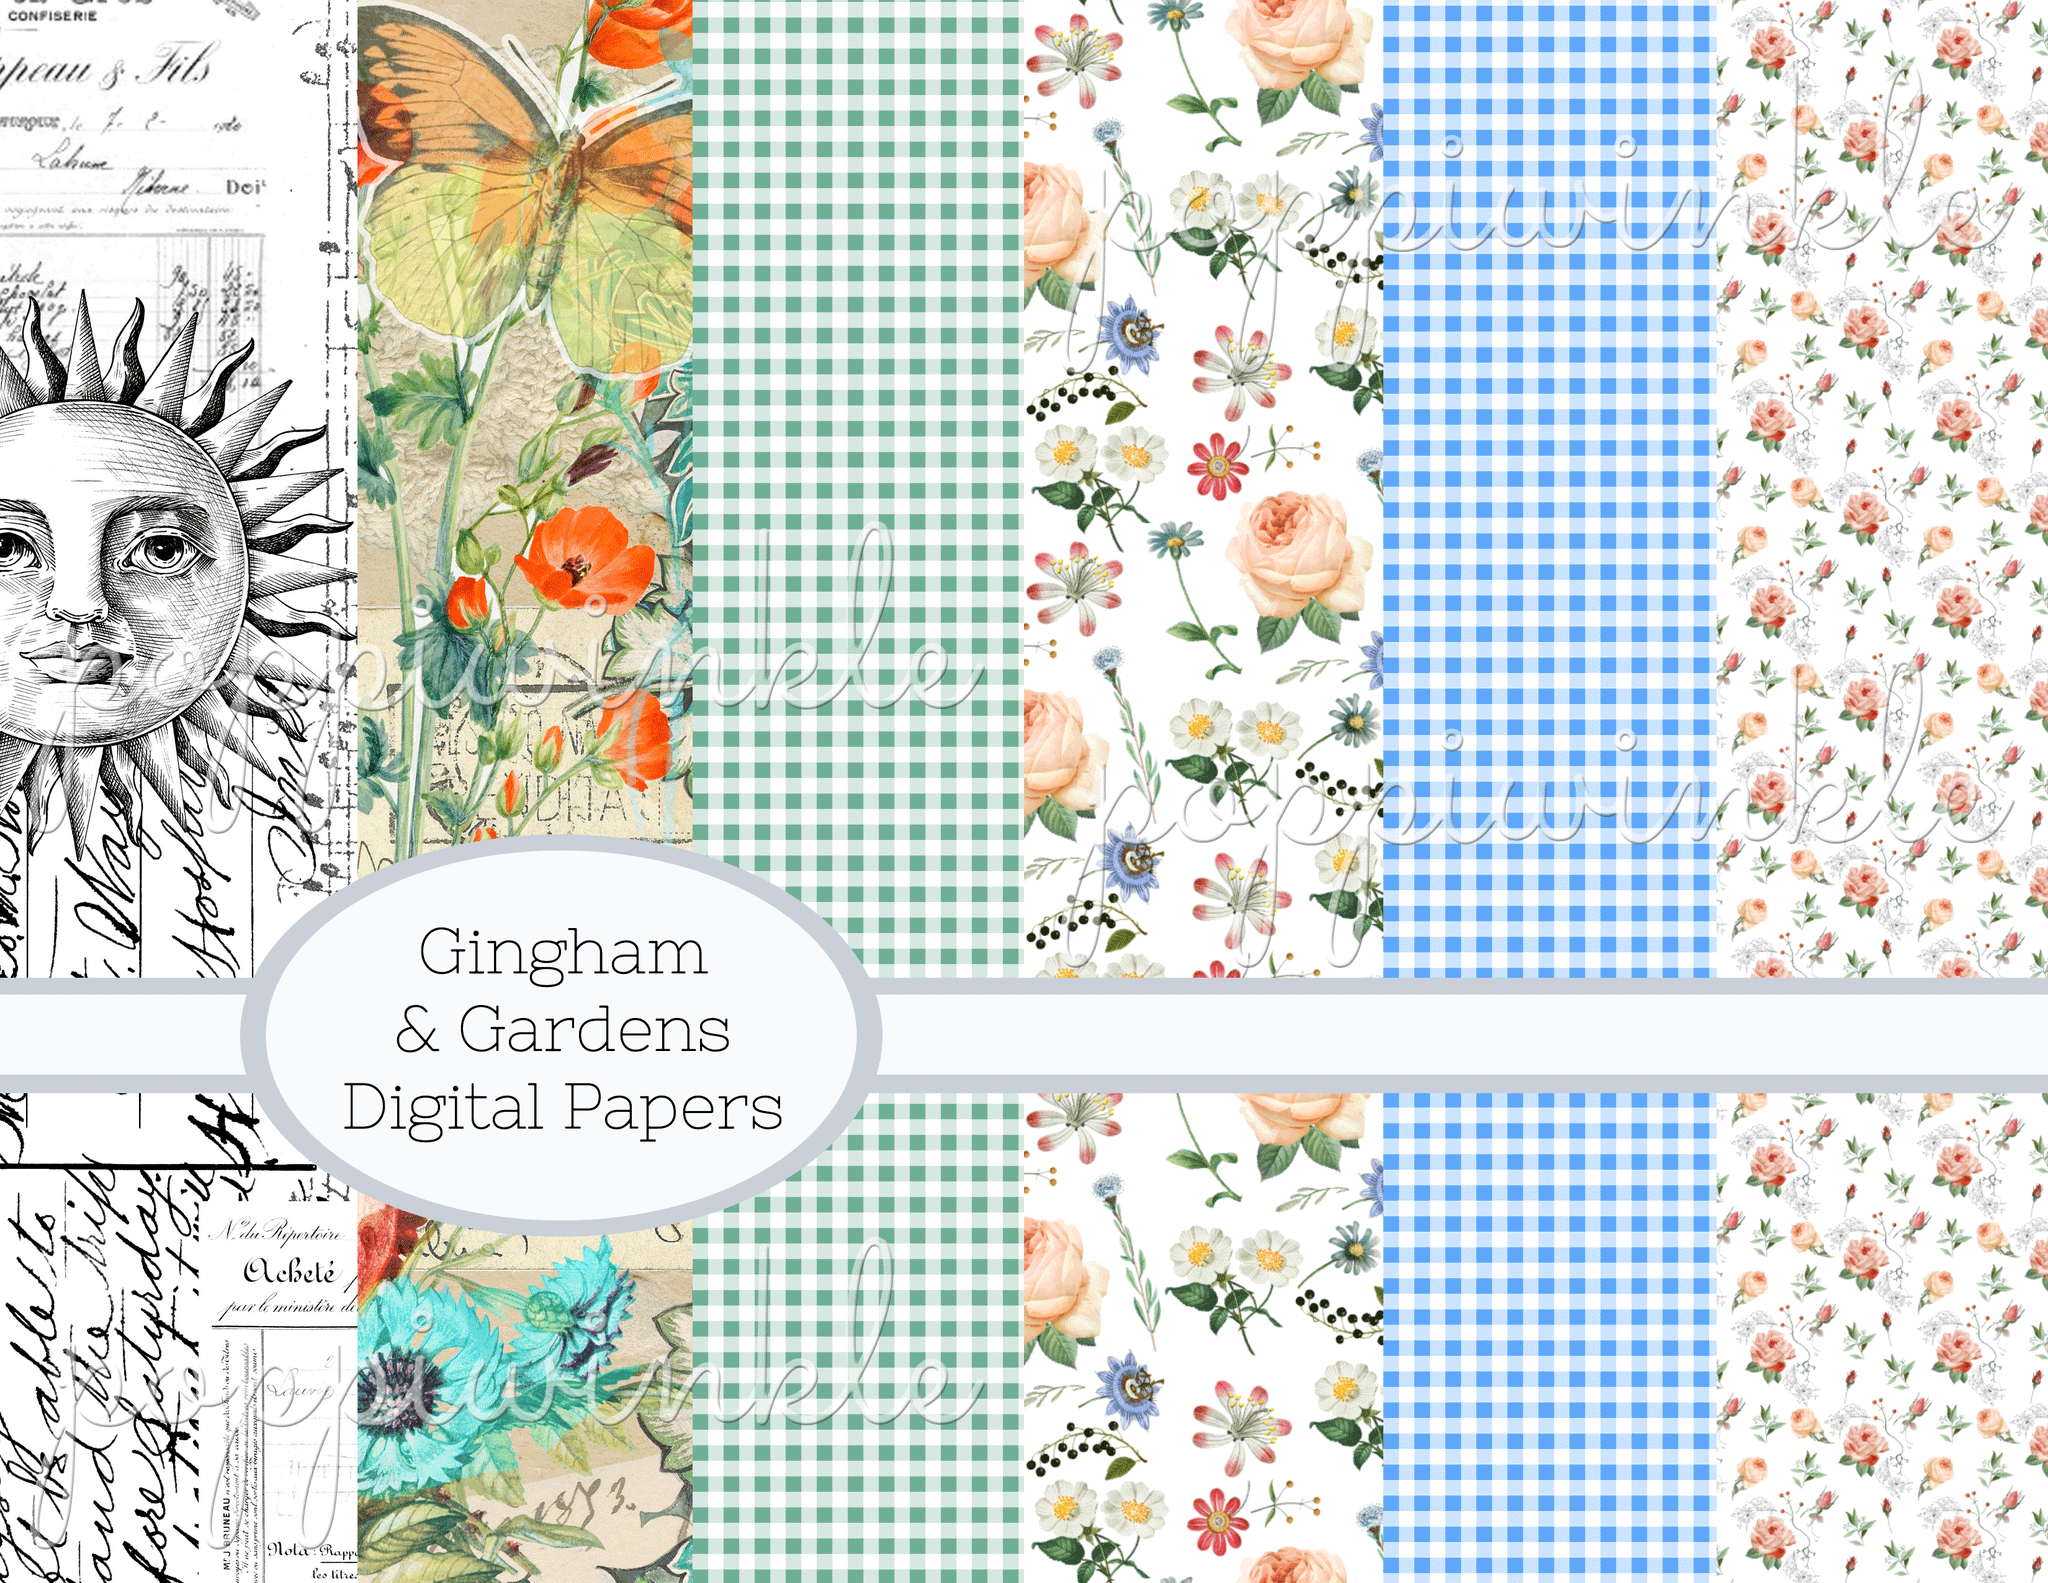 6 digital papers: black and white elements, colorful floral, green and white gingham, medium floral, blue and white gingham, pink and white calico print.